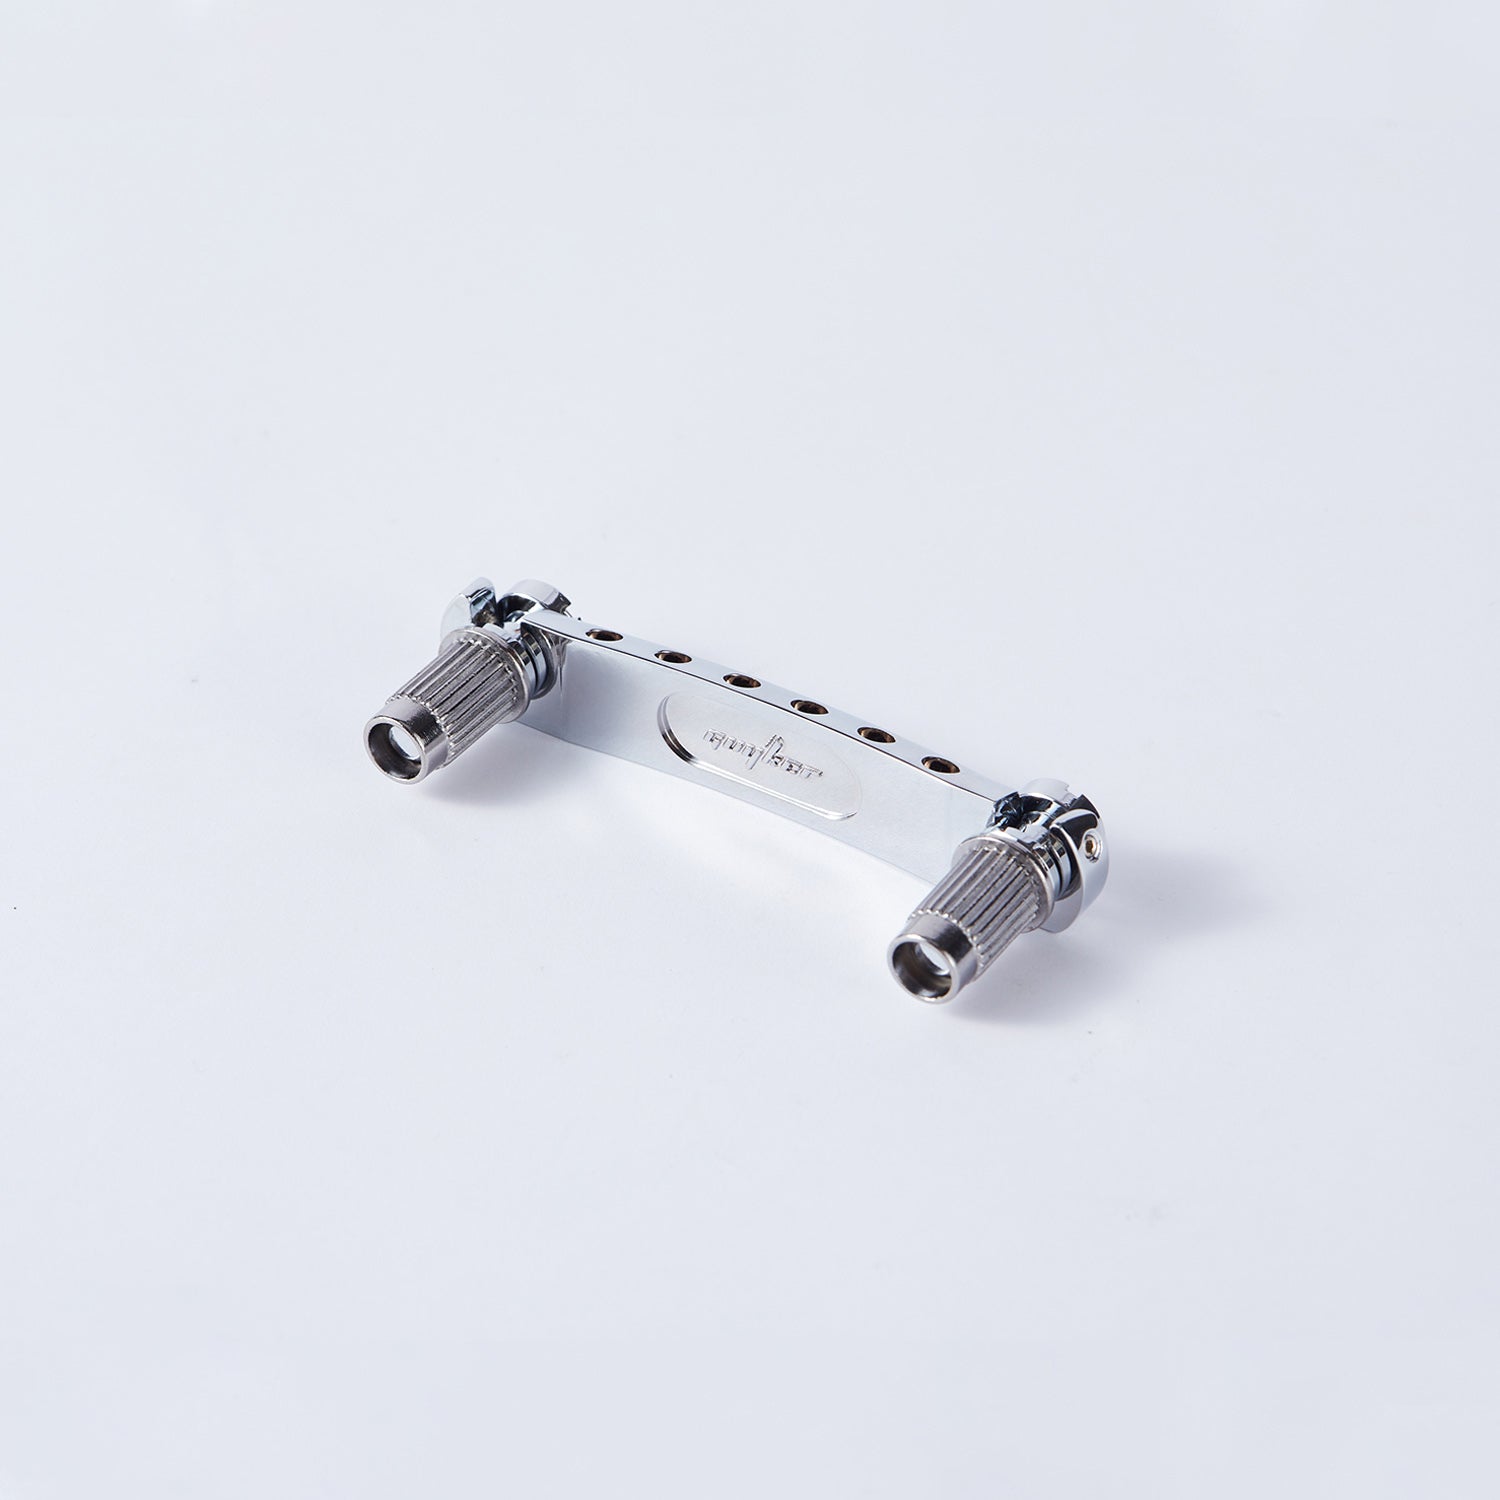 Guyker Guitar Tune-O-Matic Tailpiece Stop Bar with Studs - Bridges Parts Replacement for LP SG Style 6 String Electric Guitar